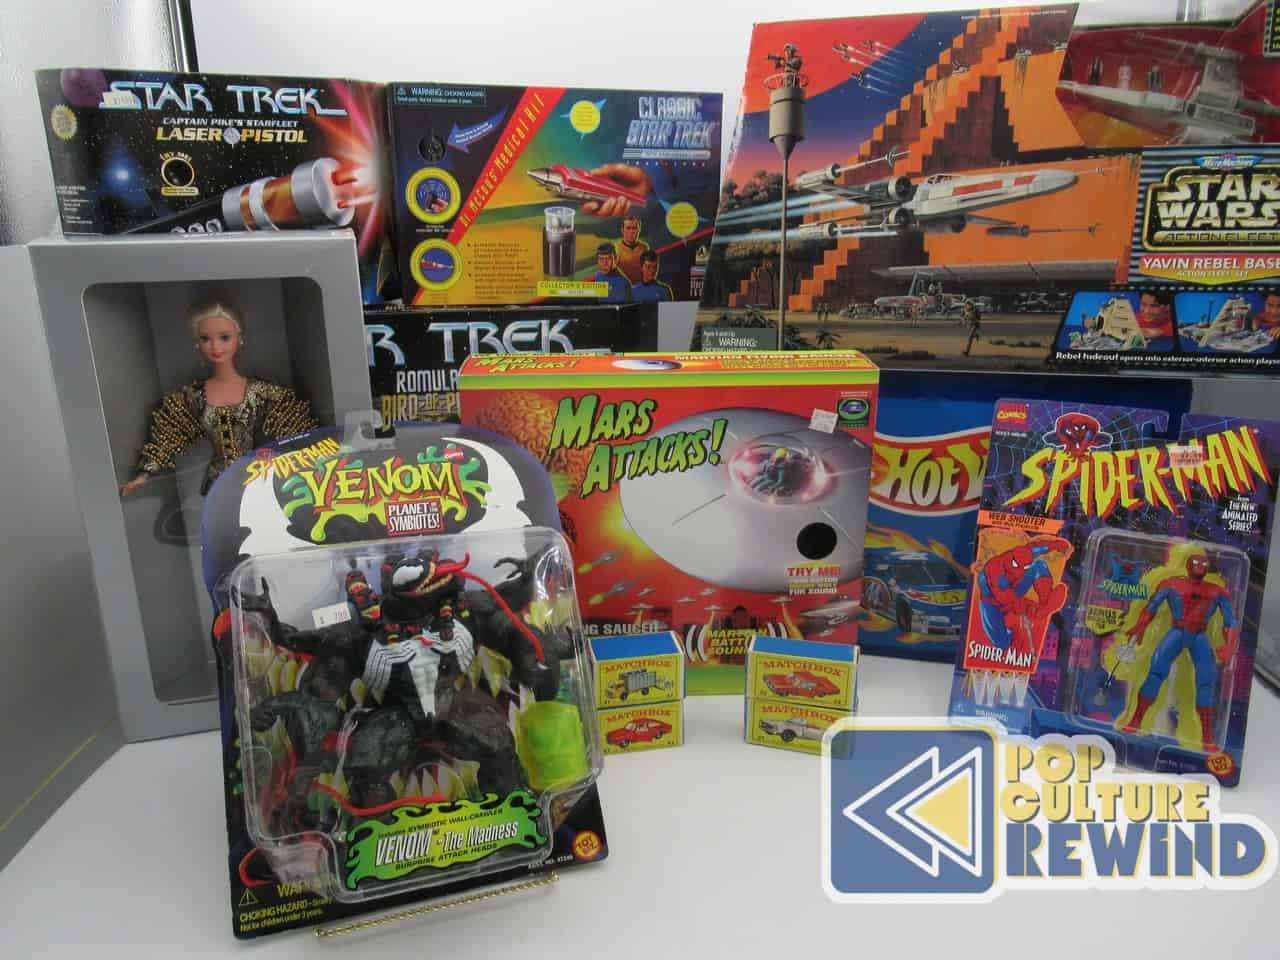 Toys coming to auction August 26!